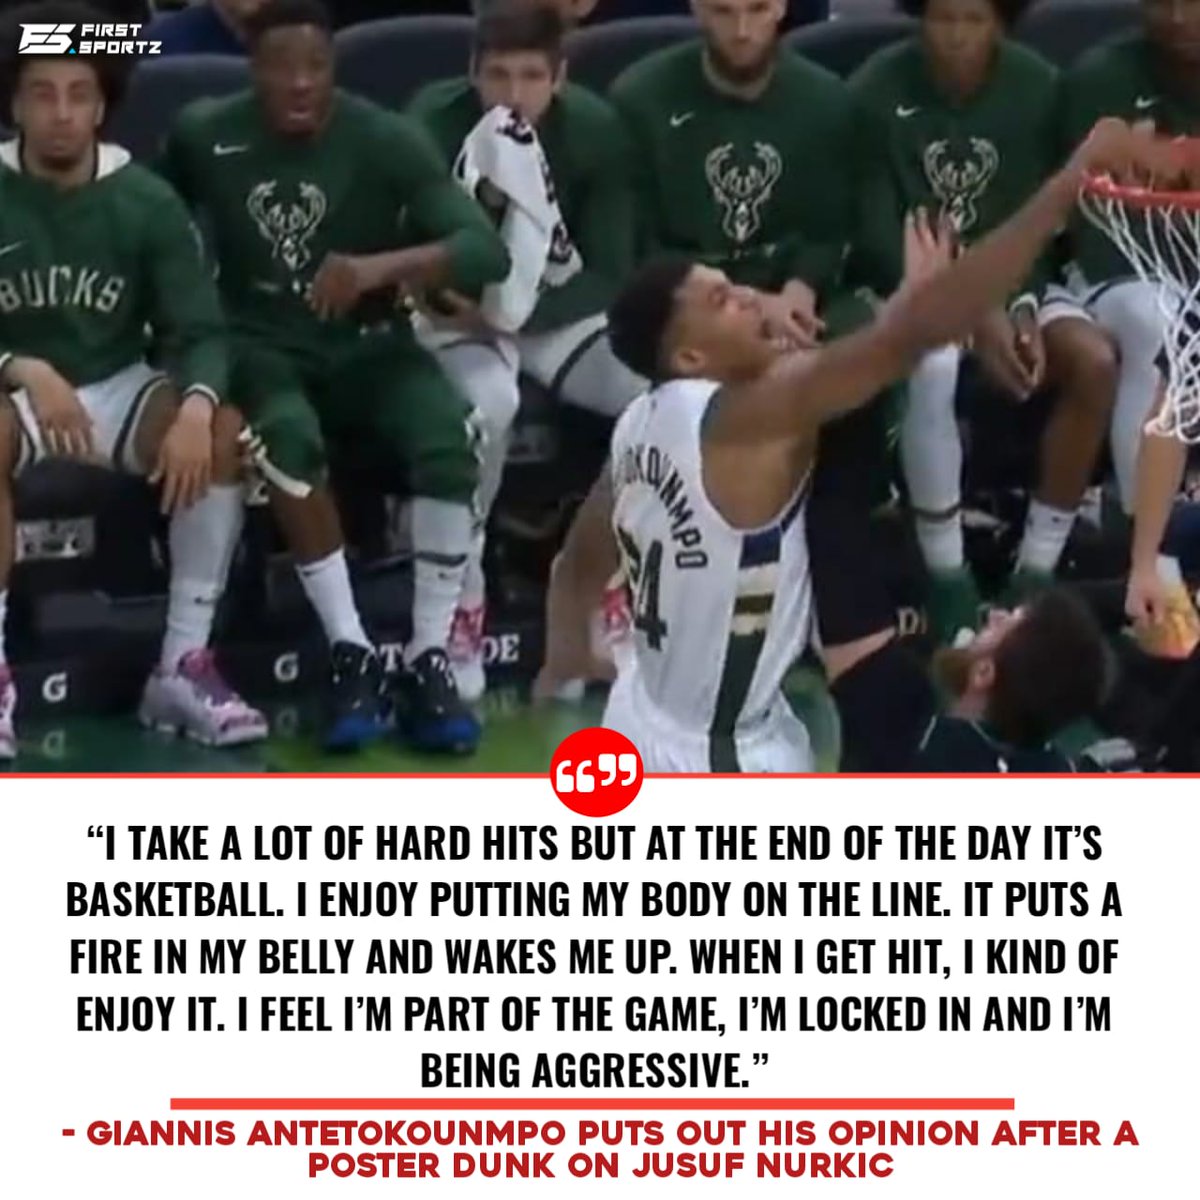 Giannis Antetokounmpo shocks everyone with a one hand poster over Jusuf Nurkic and explains the reason for his hard game.

#NBA #FearTheDeer #GiannisAntetokounmpo #Poster #Dunk #Game https://t.co/fkiQjTUtri